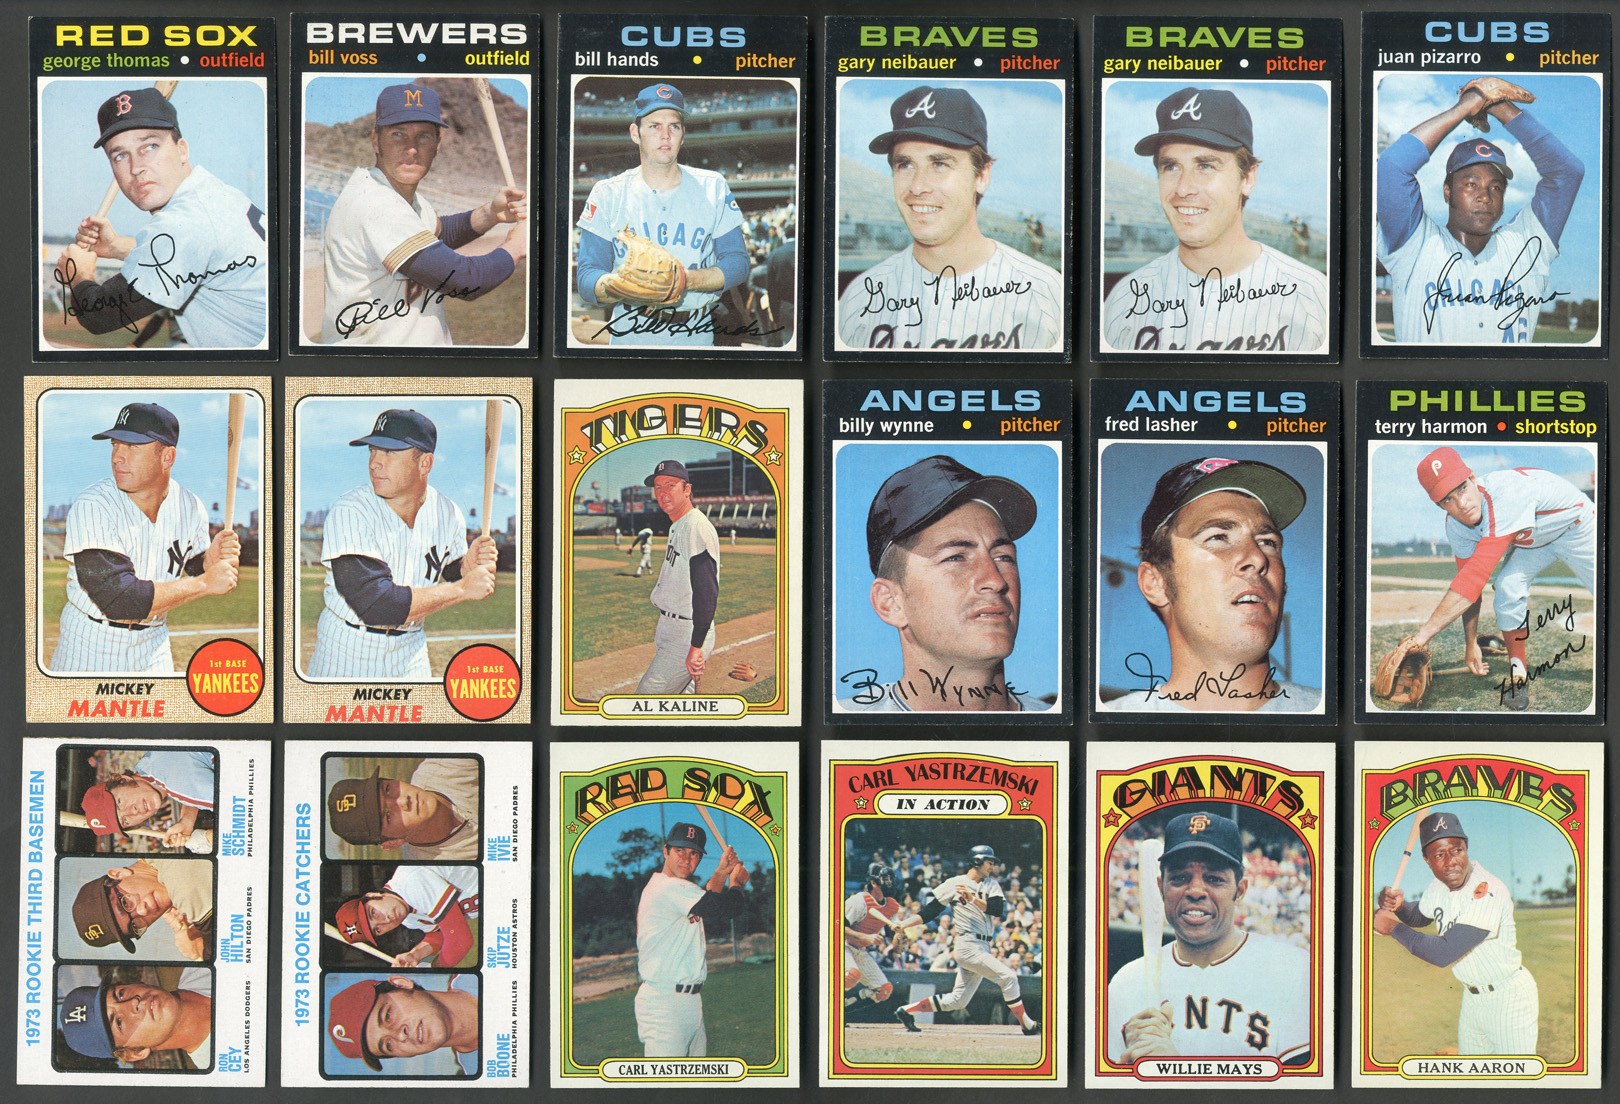 1966-1975 Topps HIGH GRADE Baseball Card Collection (6000+ Cards with Major Stars!)